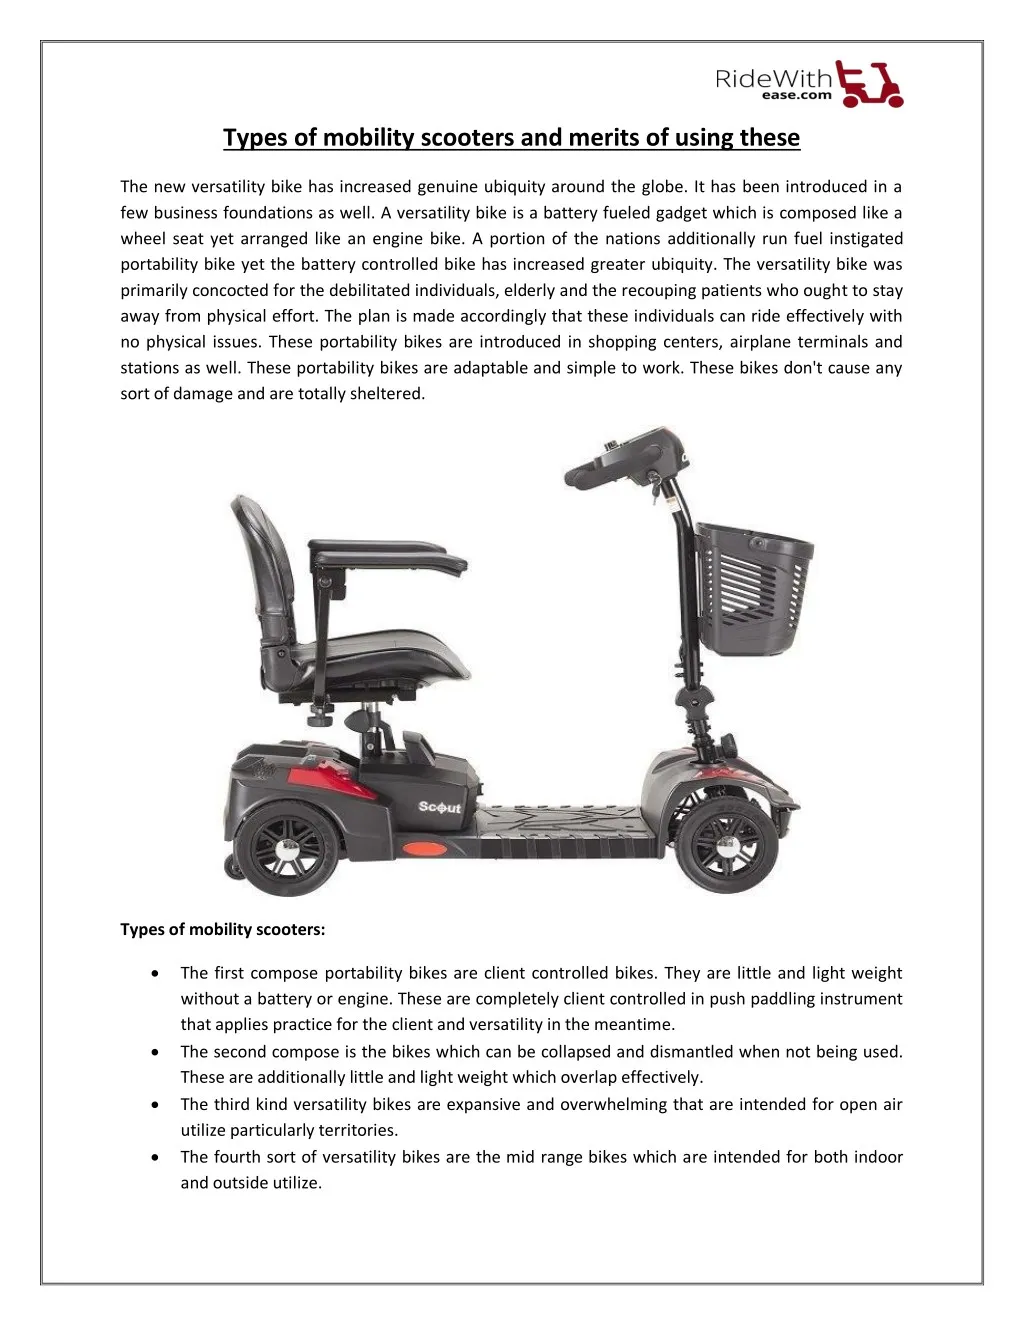 types of mobility scooters and merits of using